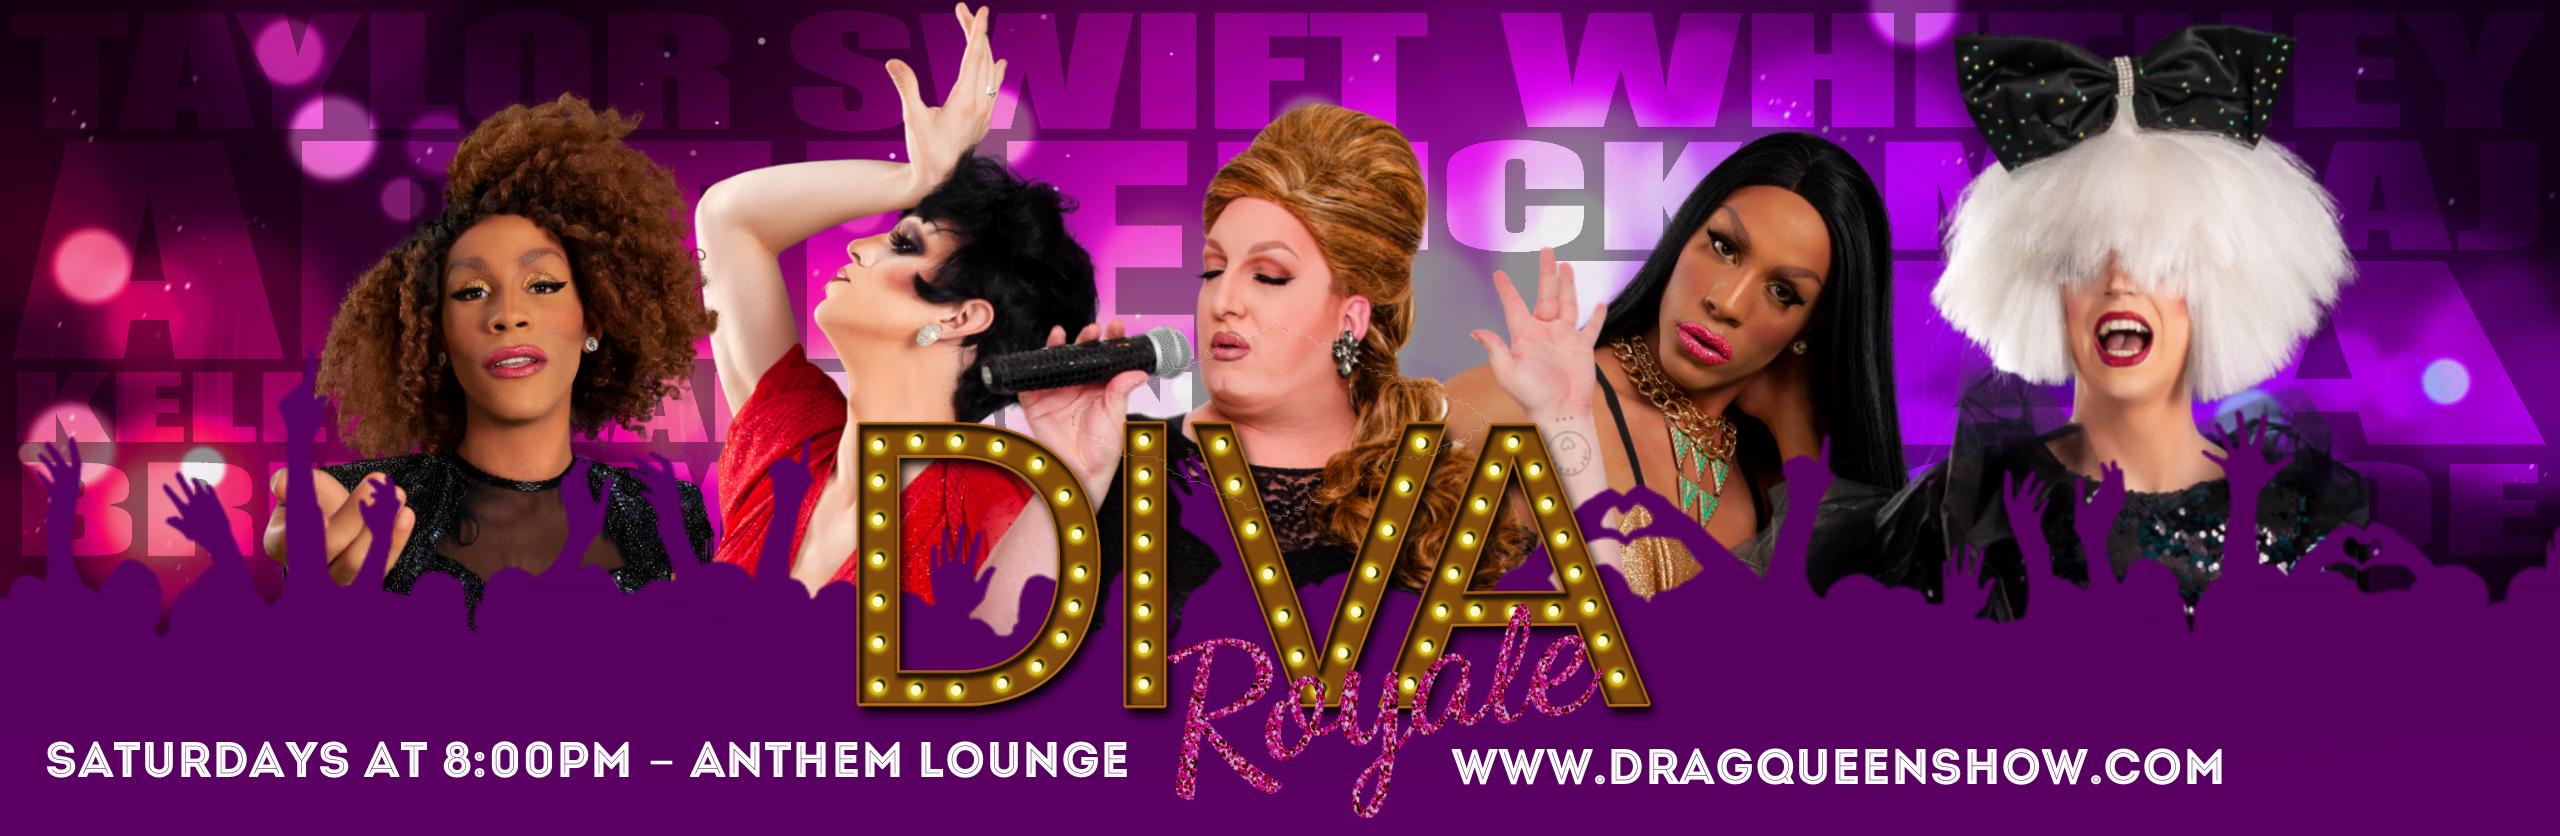 Diva Royale Drag Queen Show Atlantic City, NJ - Weekly Drag Queen Shows in AC - Perfect for Bachelorette & Bachelor Parties